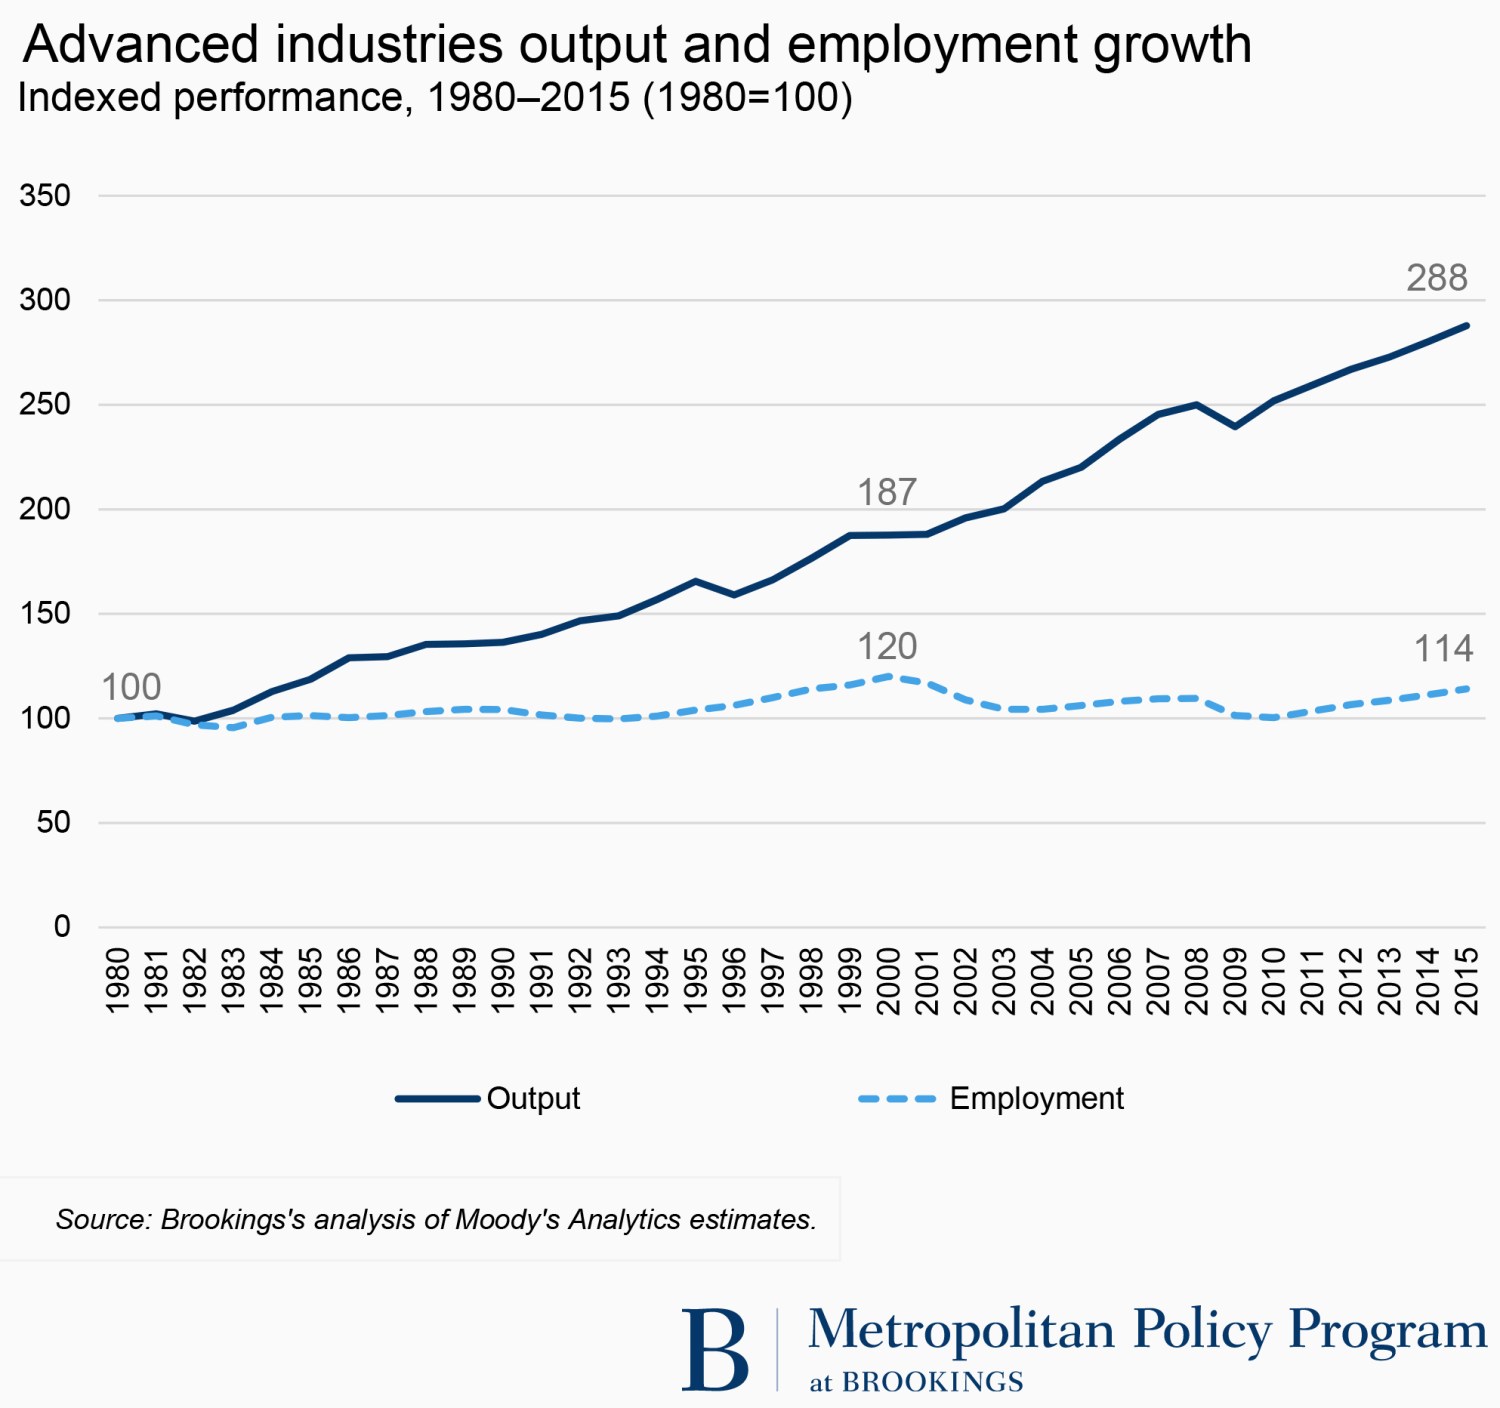 Advanced industries output and employment growth